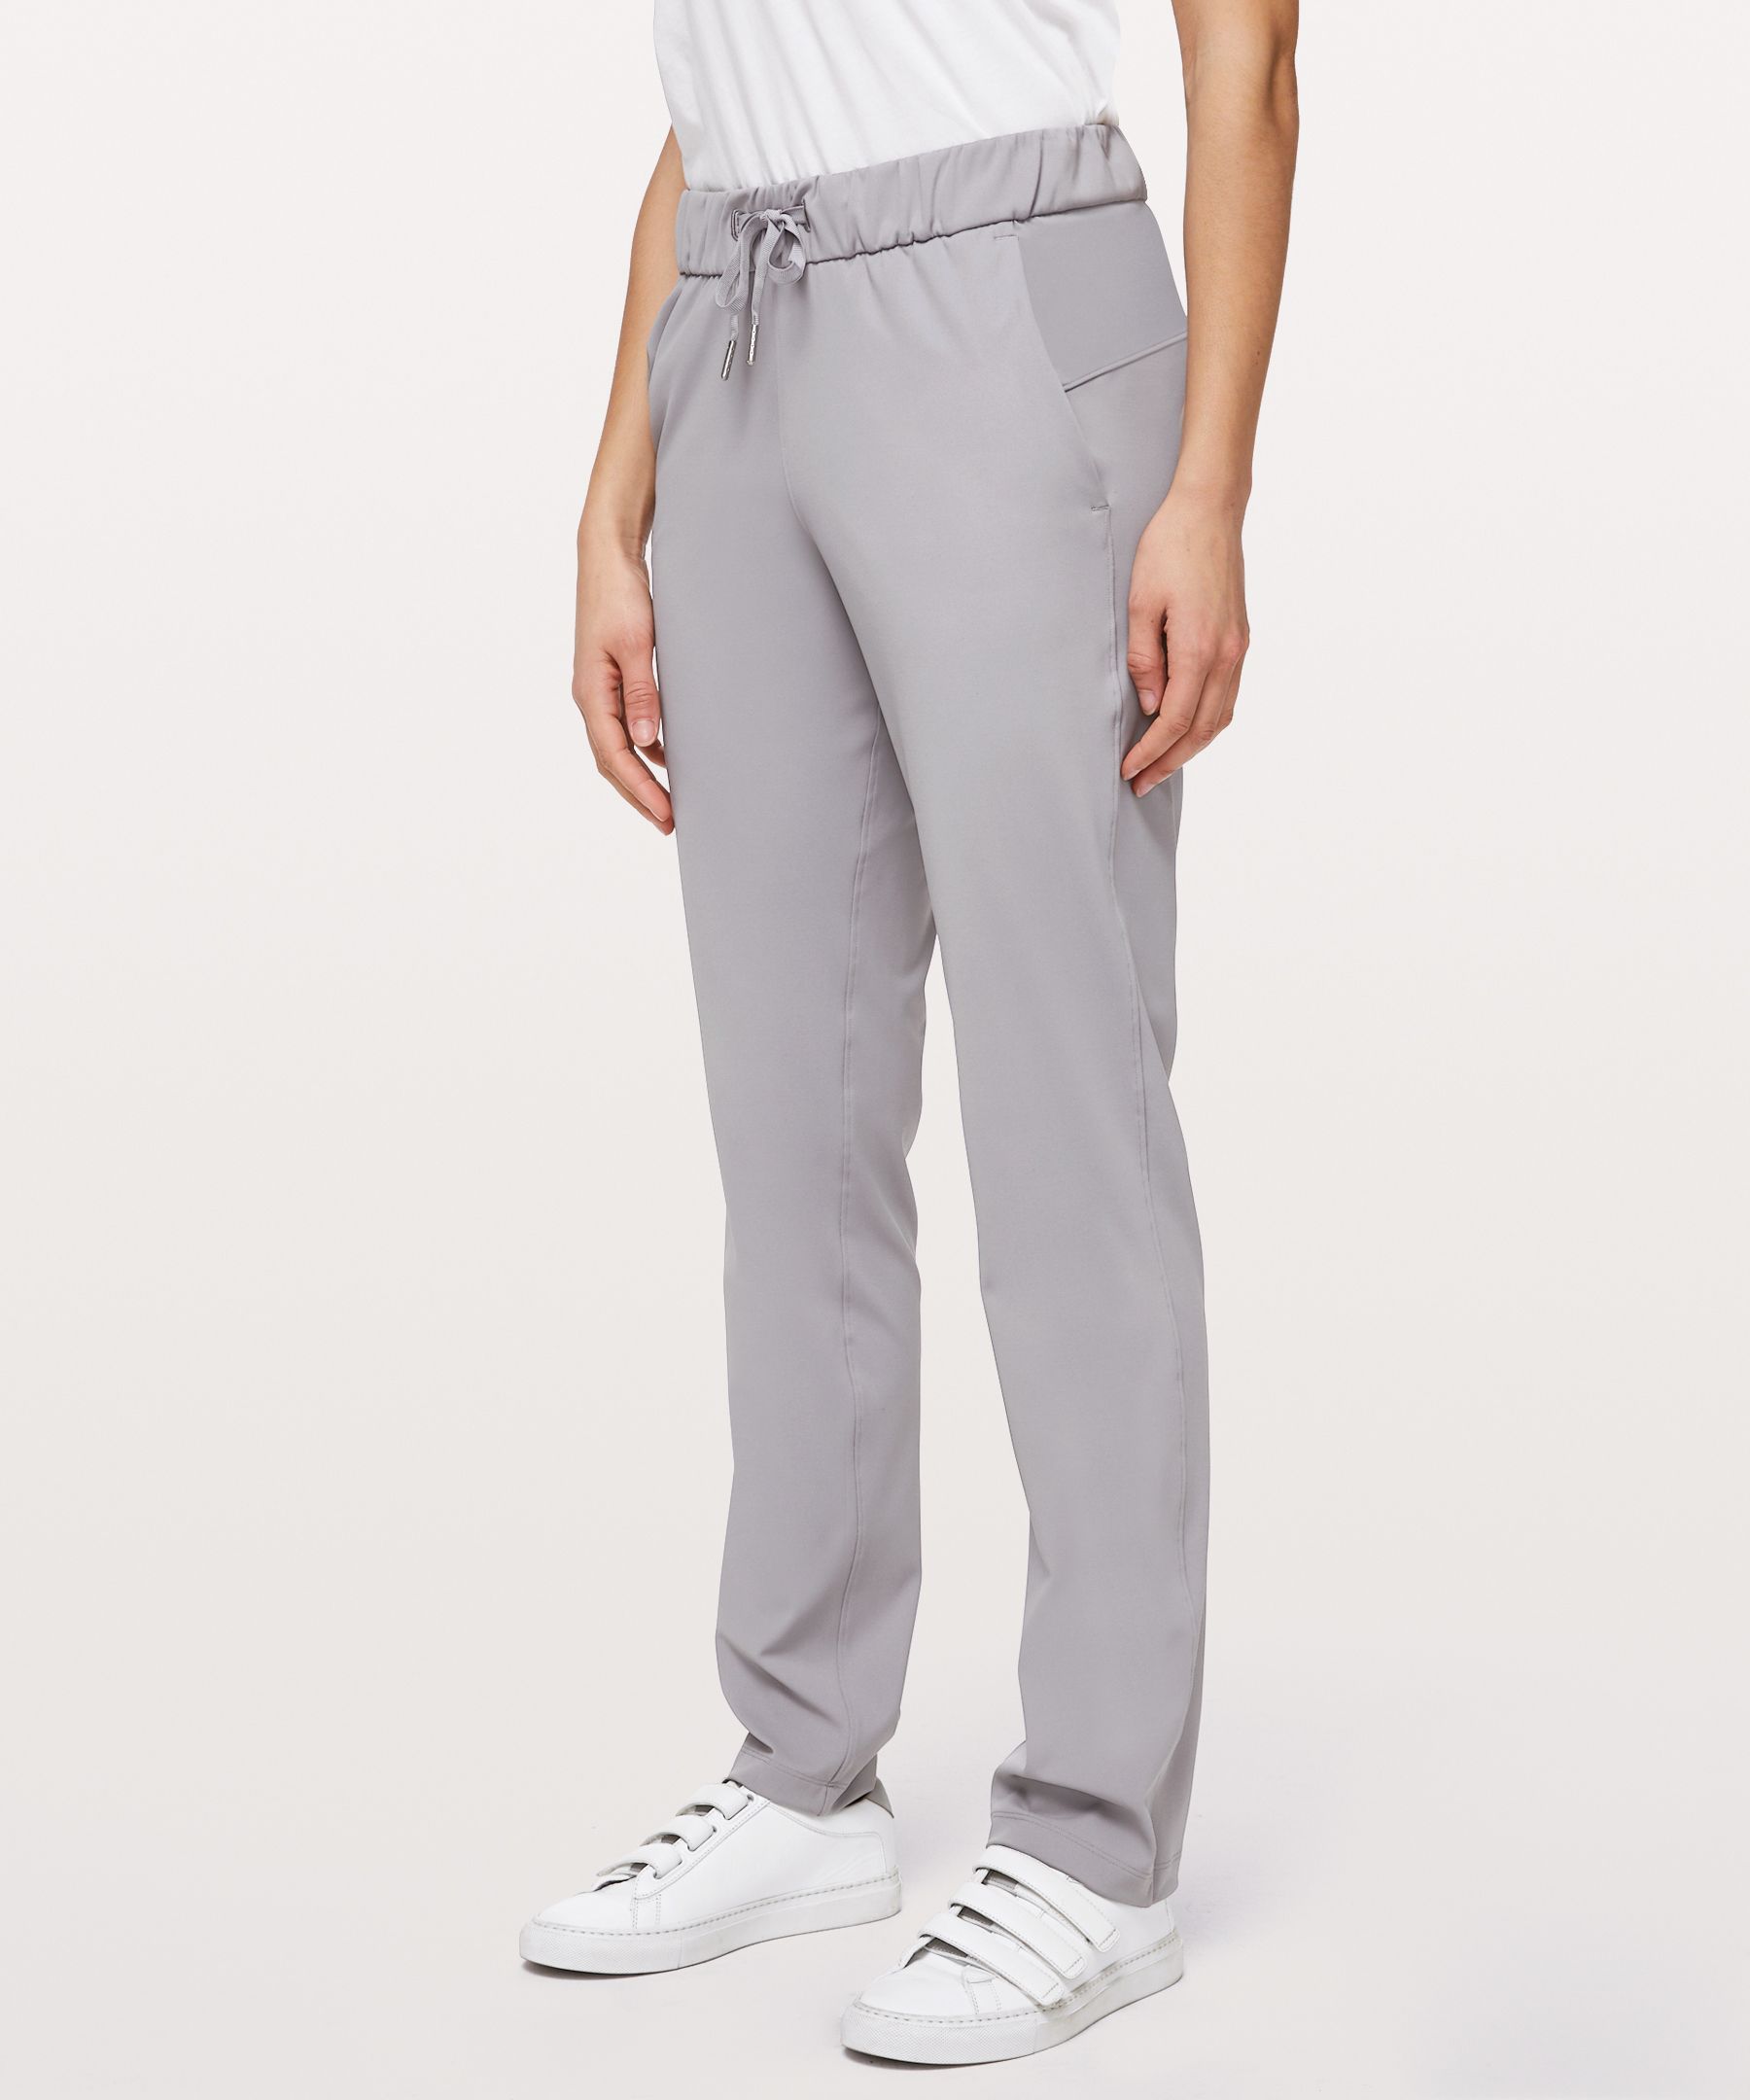 Lululemon On The Fly Pant Full Length *online Only In Silverscreen